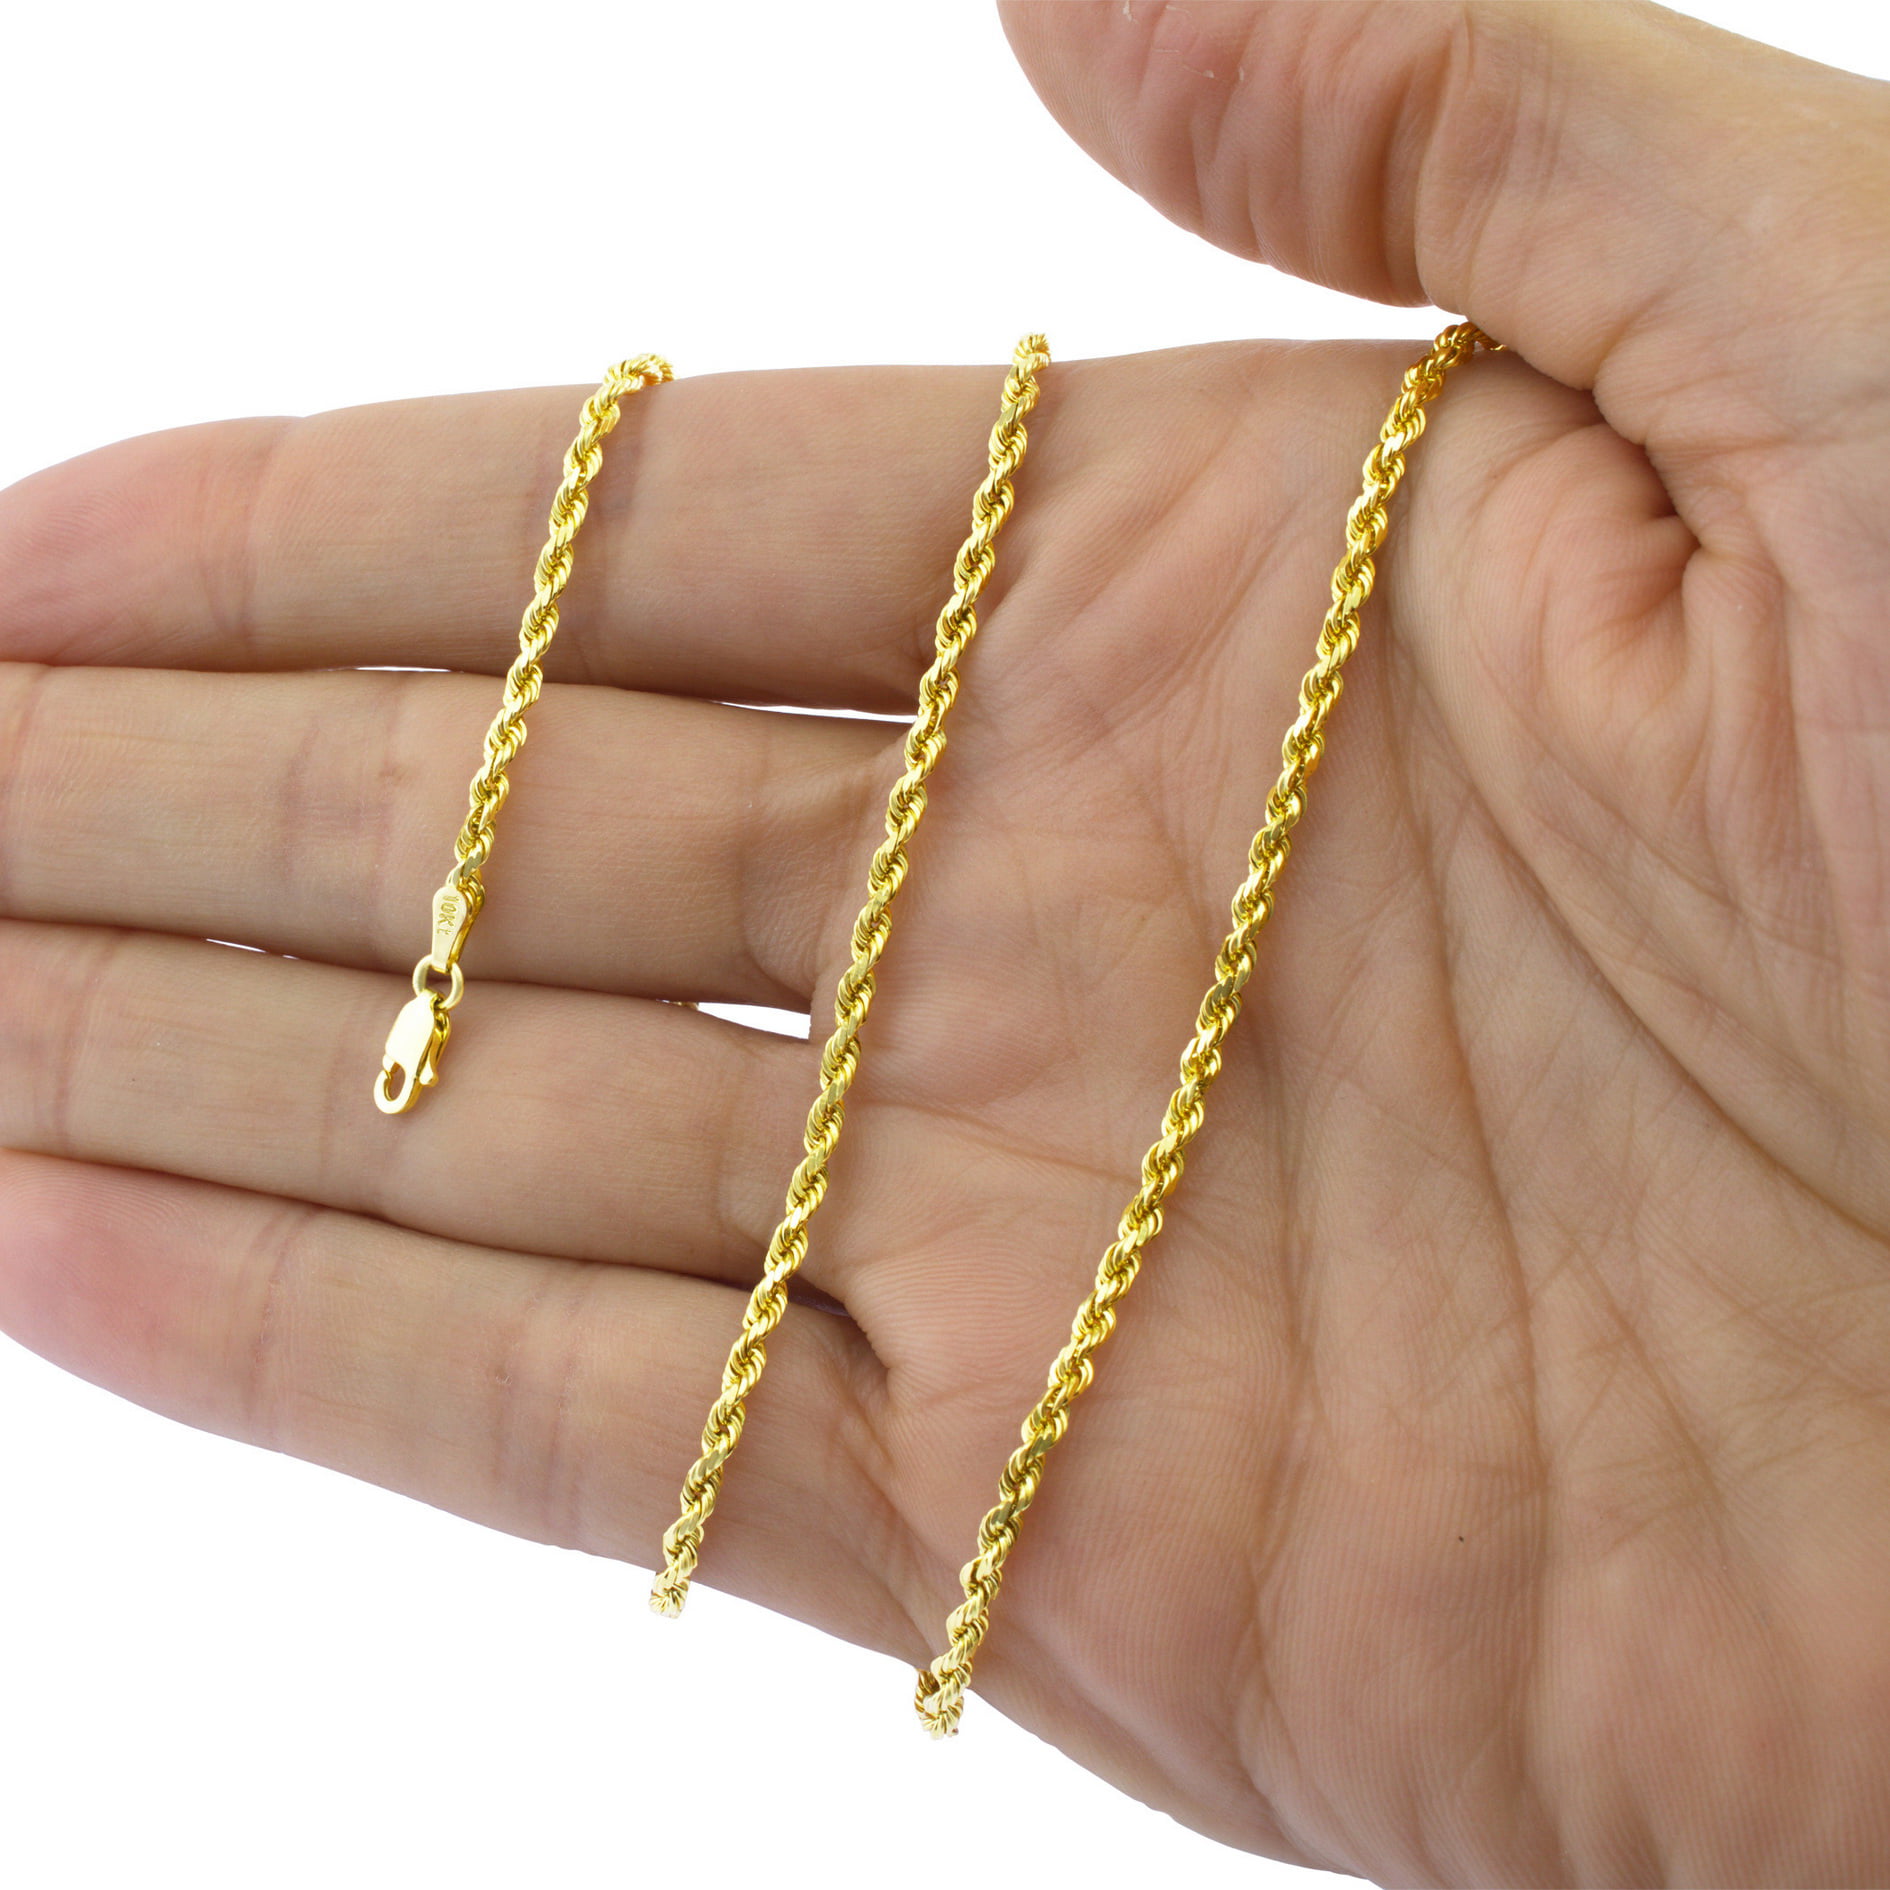 Brand New 10k Yellow Gold 2.5mm Italy Rope Chain Twist Link Necklace Sz 16"-30" 